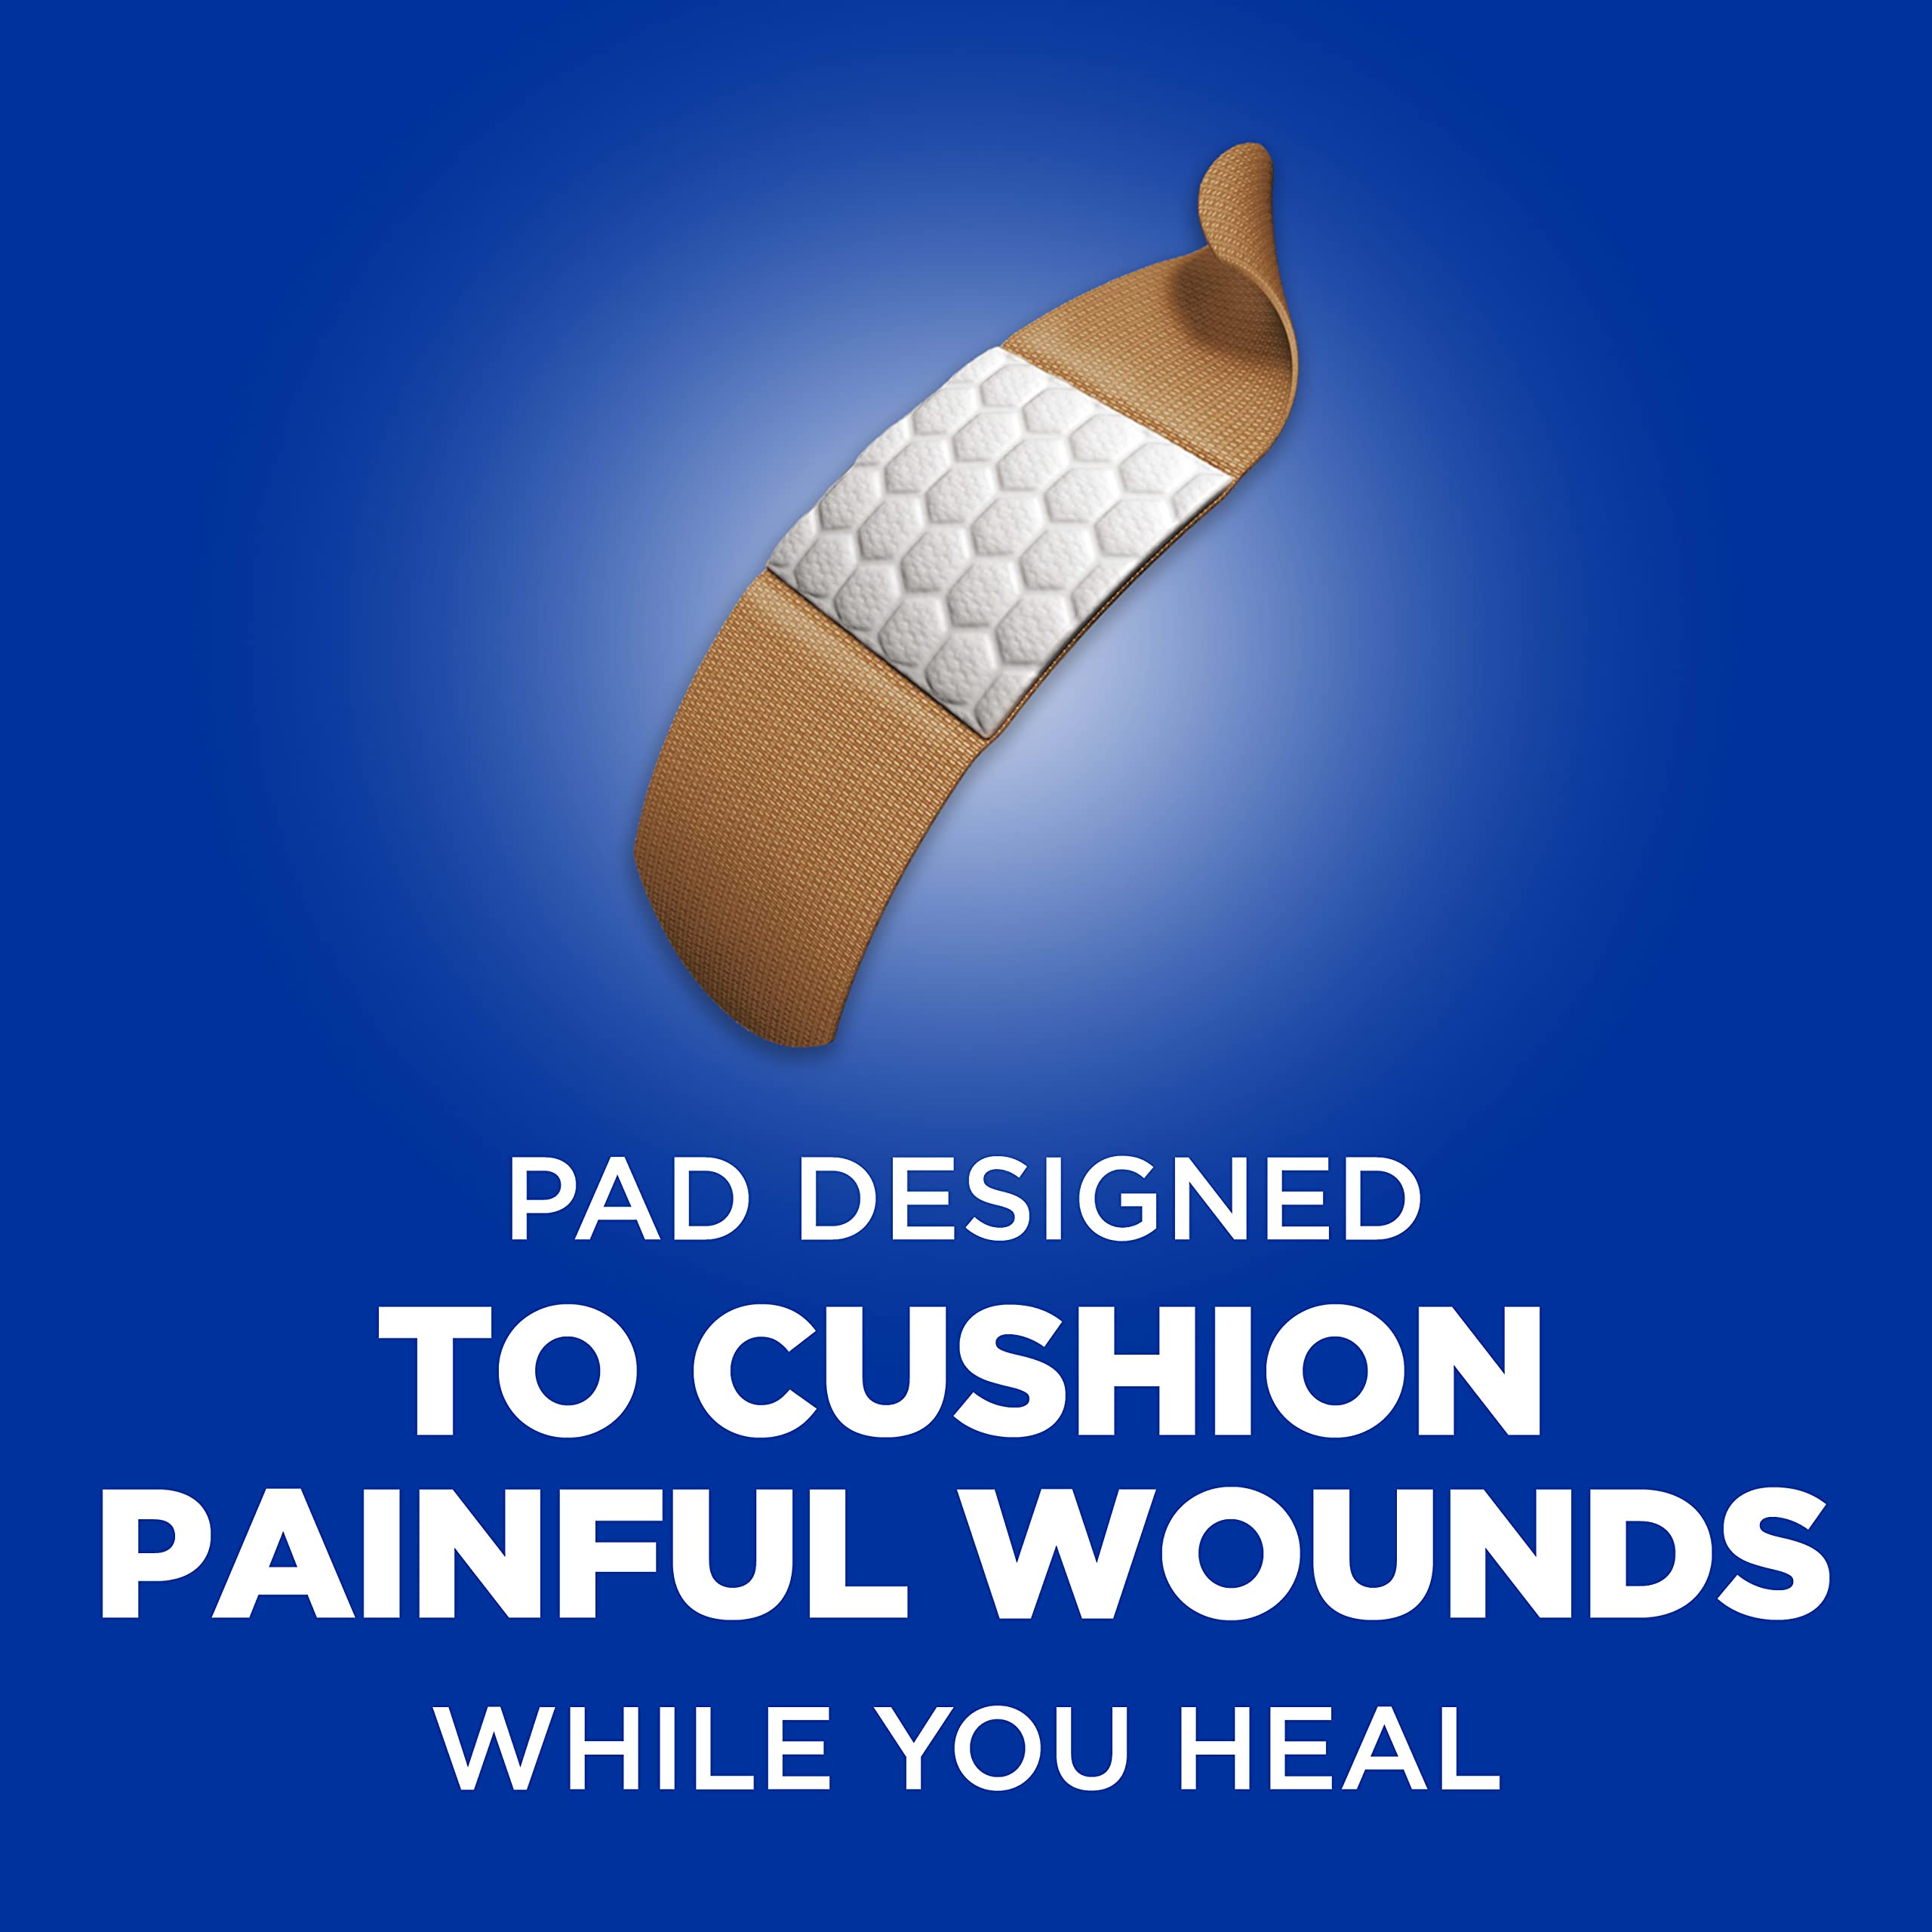 Band-Aid Brand Flexible Fabric Adhesive Bandages for Wound Care and First Aid, All One Size, 8 ct